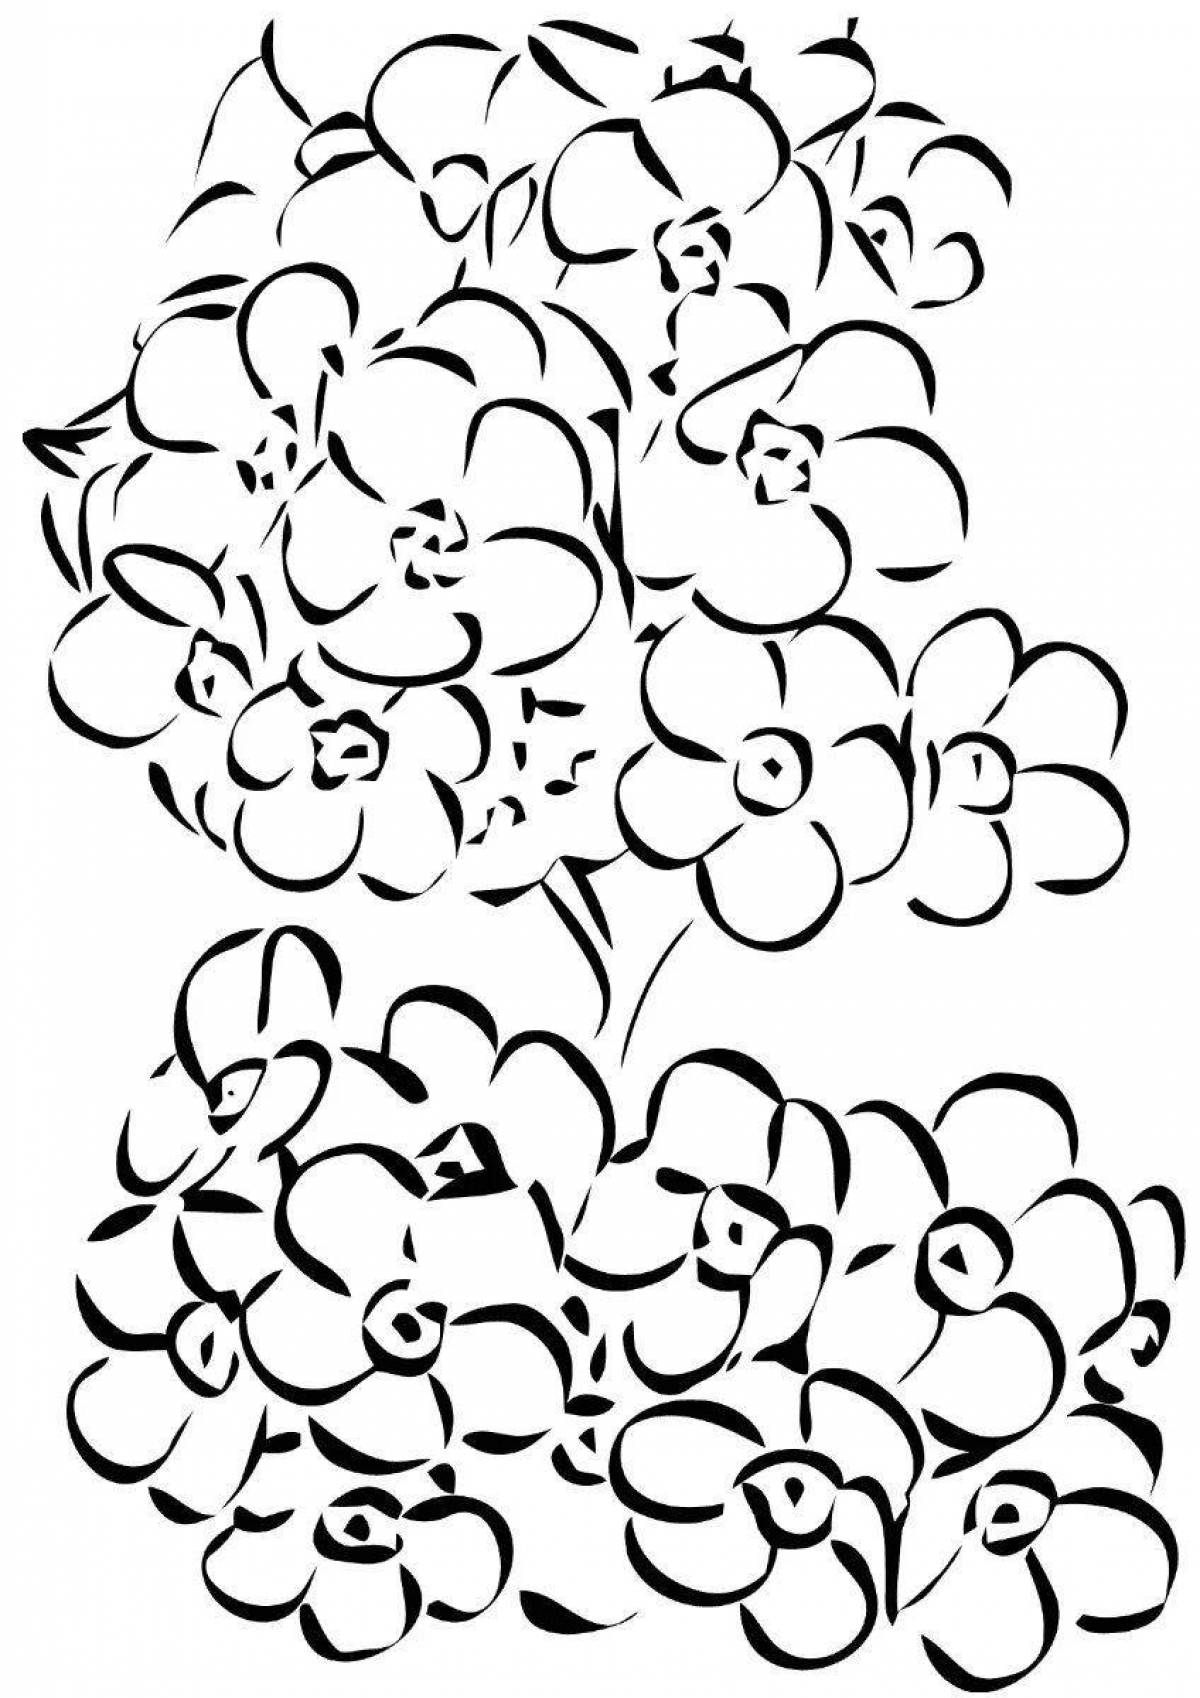 Lucky forget-me-not flower coloring page